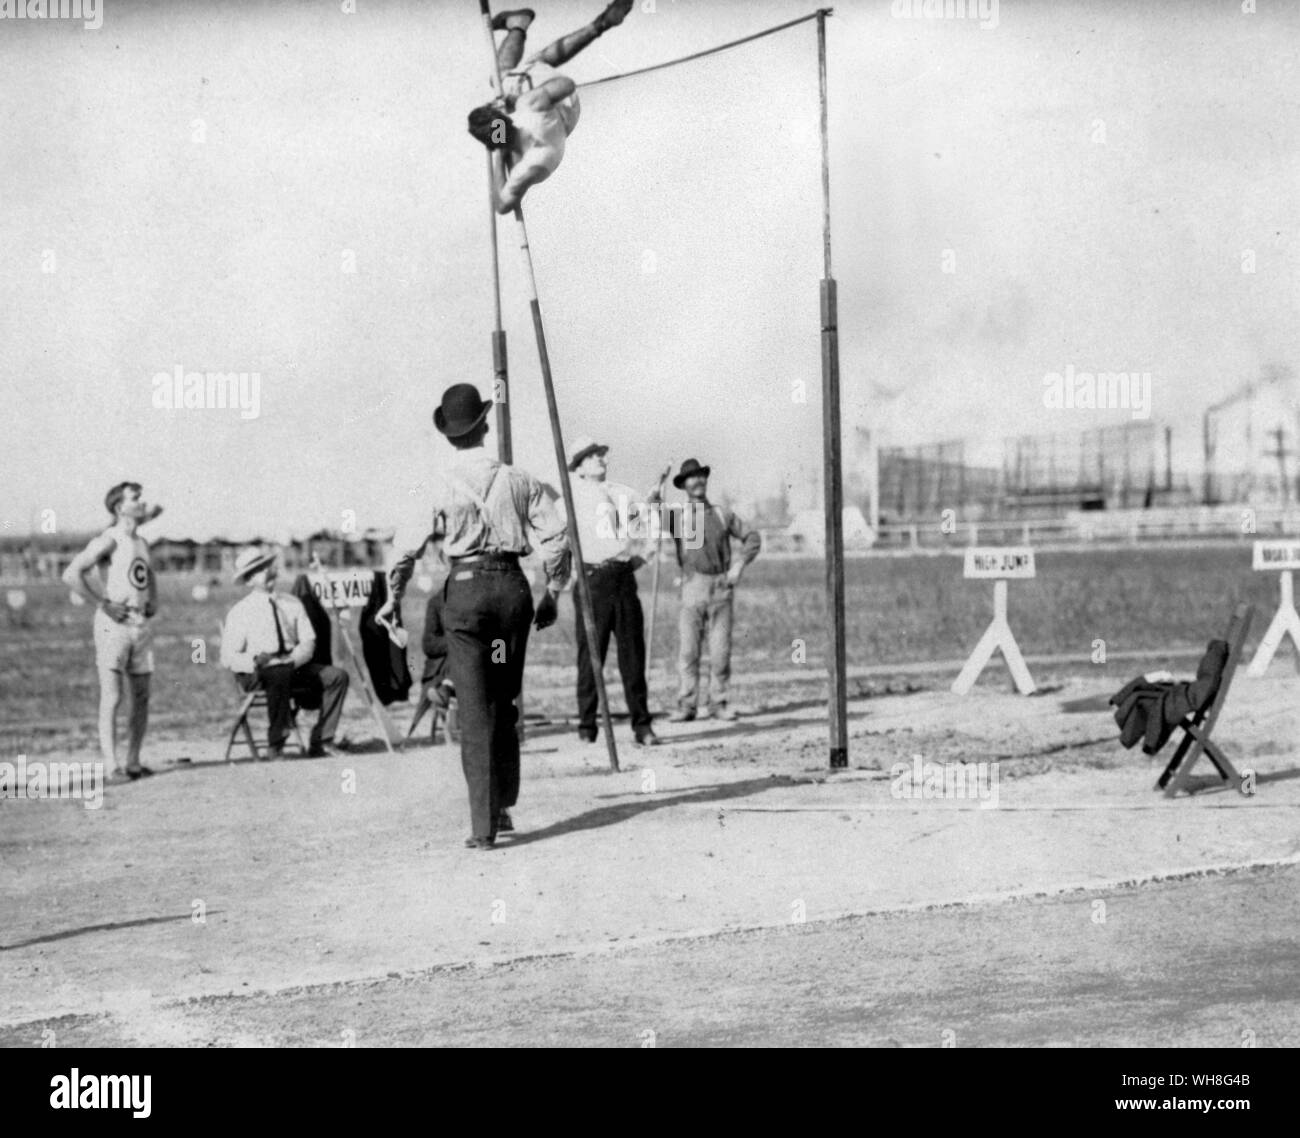 Victory in the pole vault for Charles Dvorak (United States) at 3 50m 11ft 6in at the World Fair Olympic Games, St Louis, 1904. The Olympic Games page 54. Stock Photo